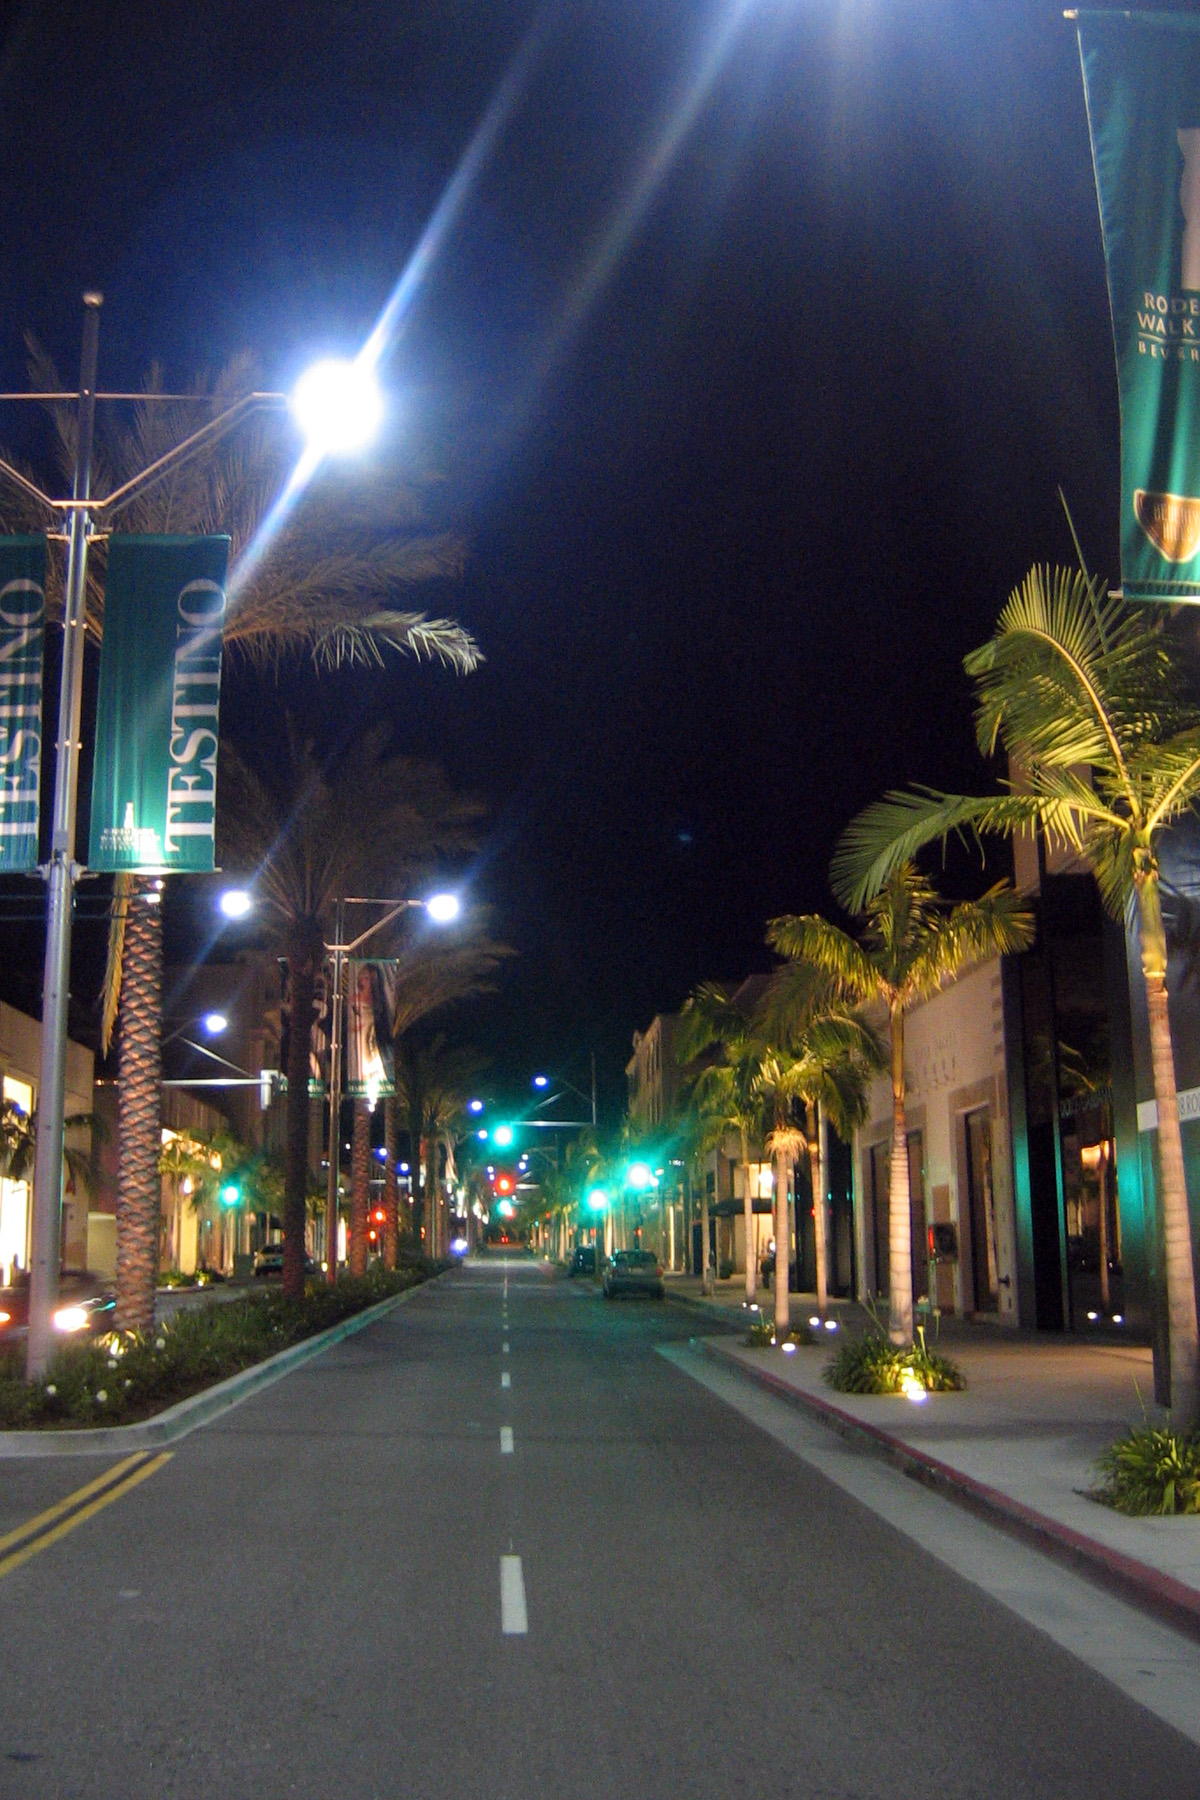 Try it at night - Review of Rodeo Drive, Beverly Hills, CA